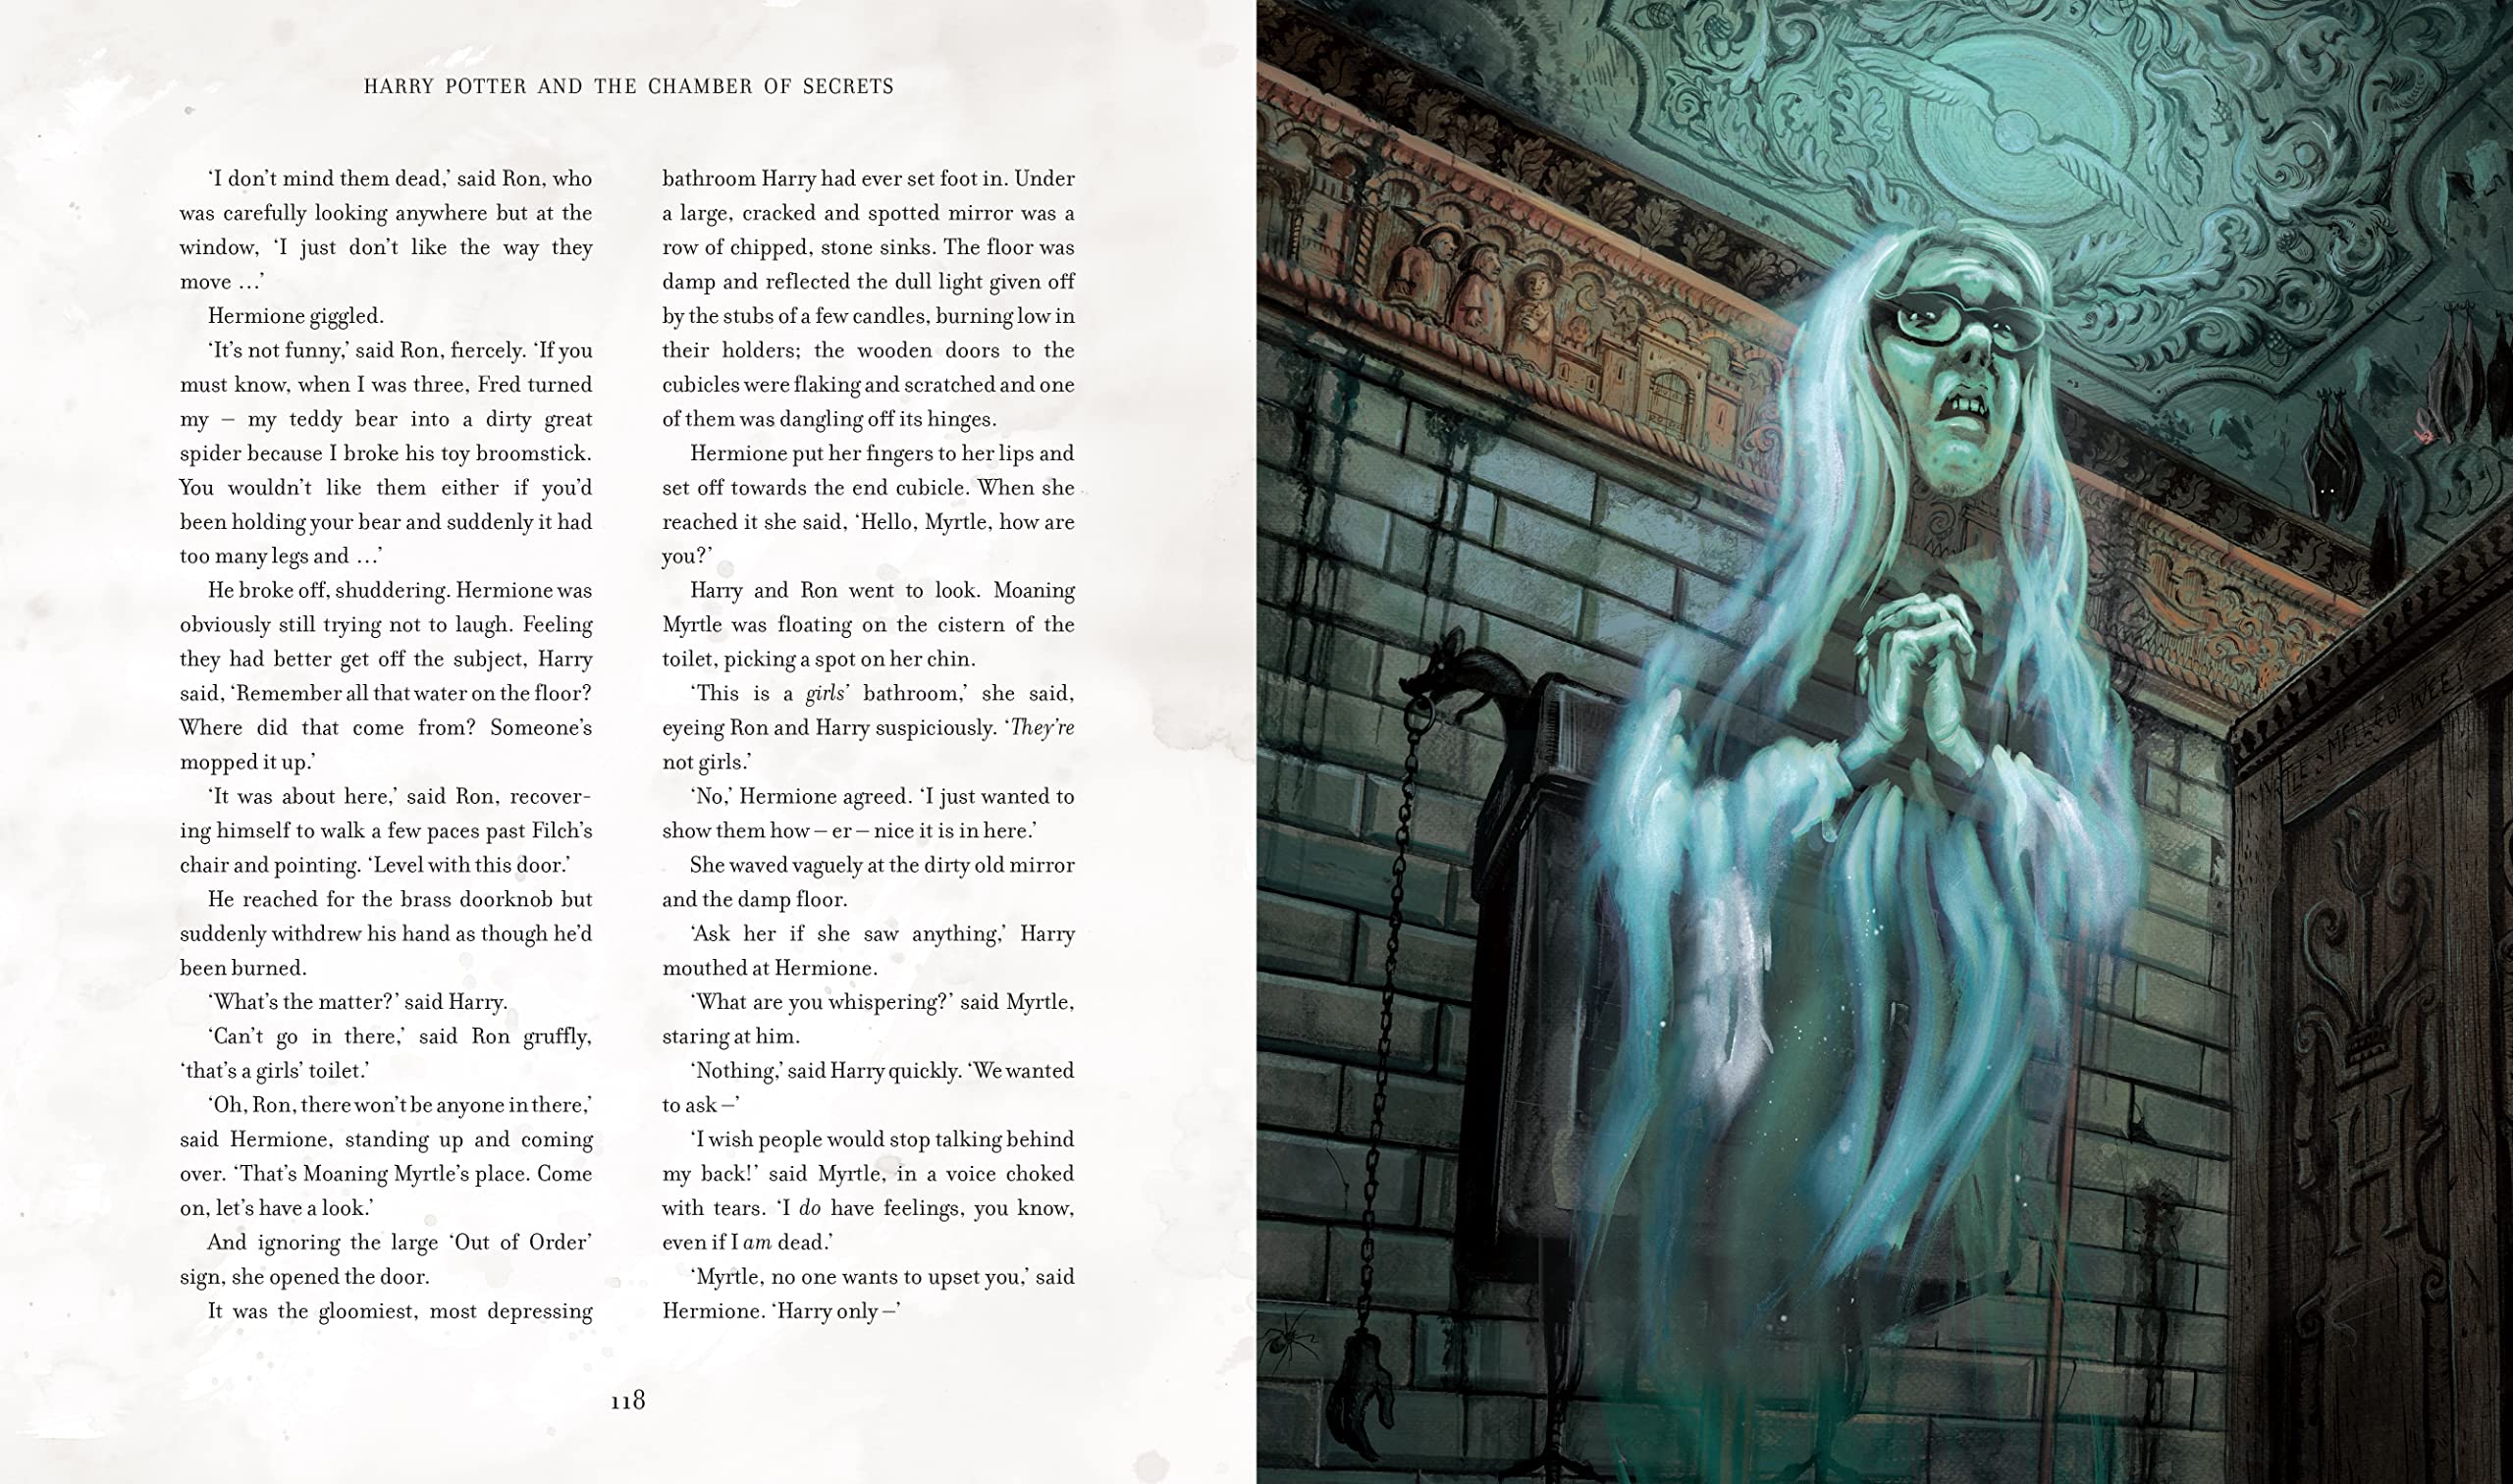 Harry Potter and the Chamber of Secrets: Illustrated Edition - The English Bookshop Kuwait